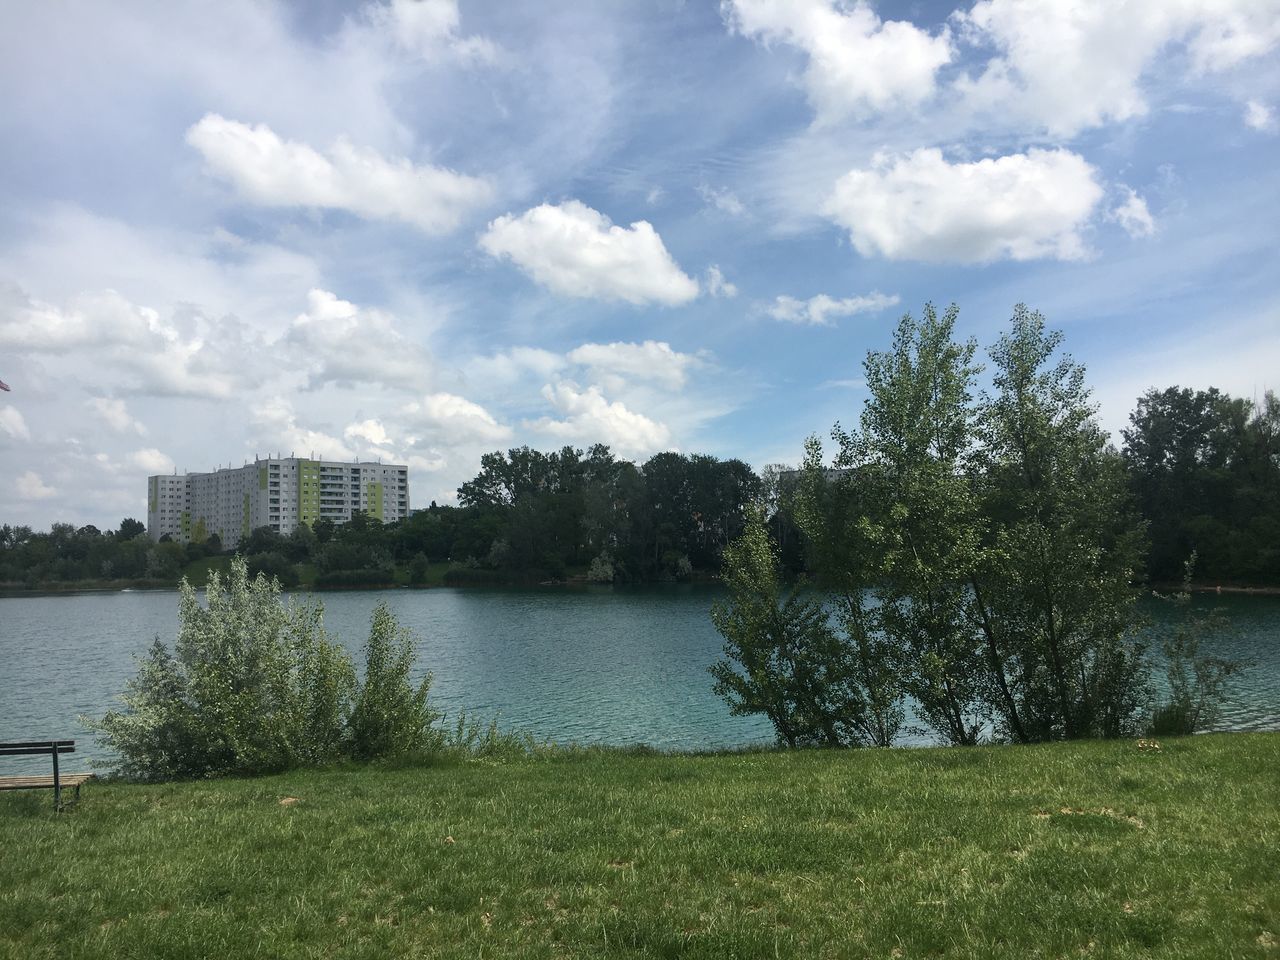 SCENIC VIEW OF LAKE AGAINST SKY IN CITY